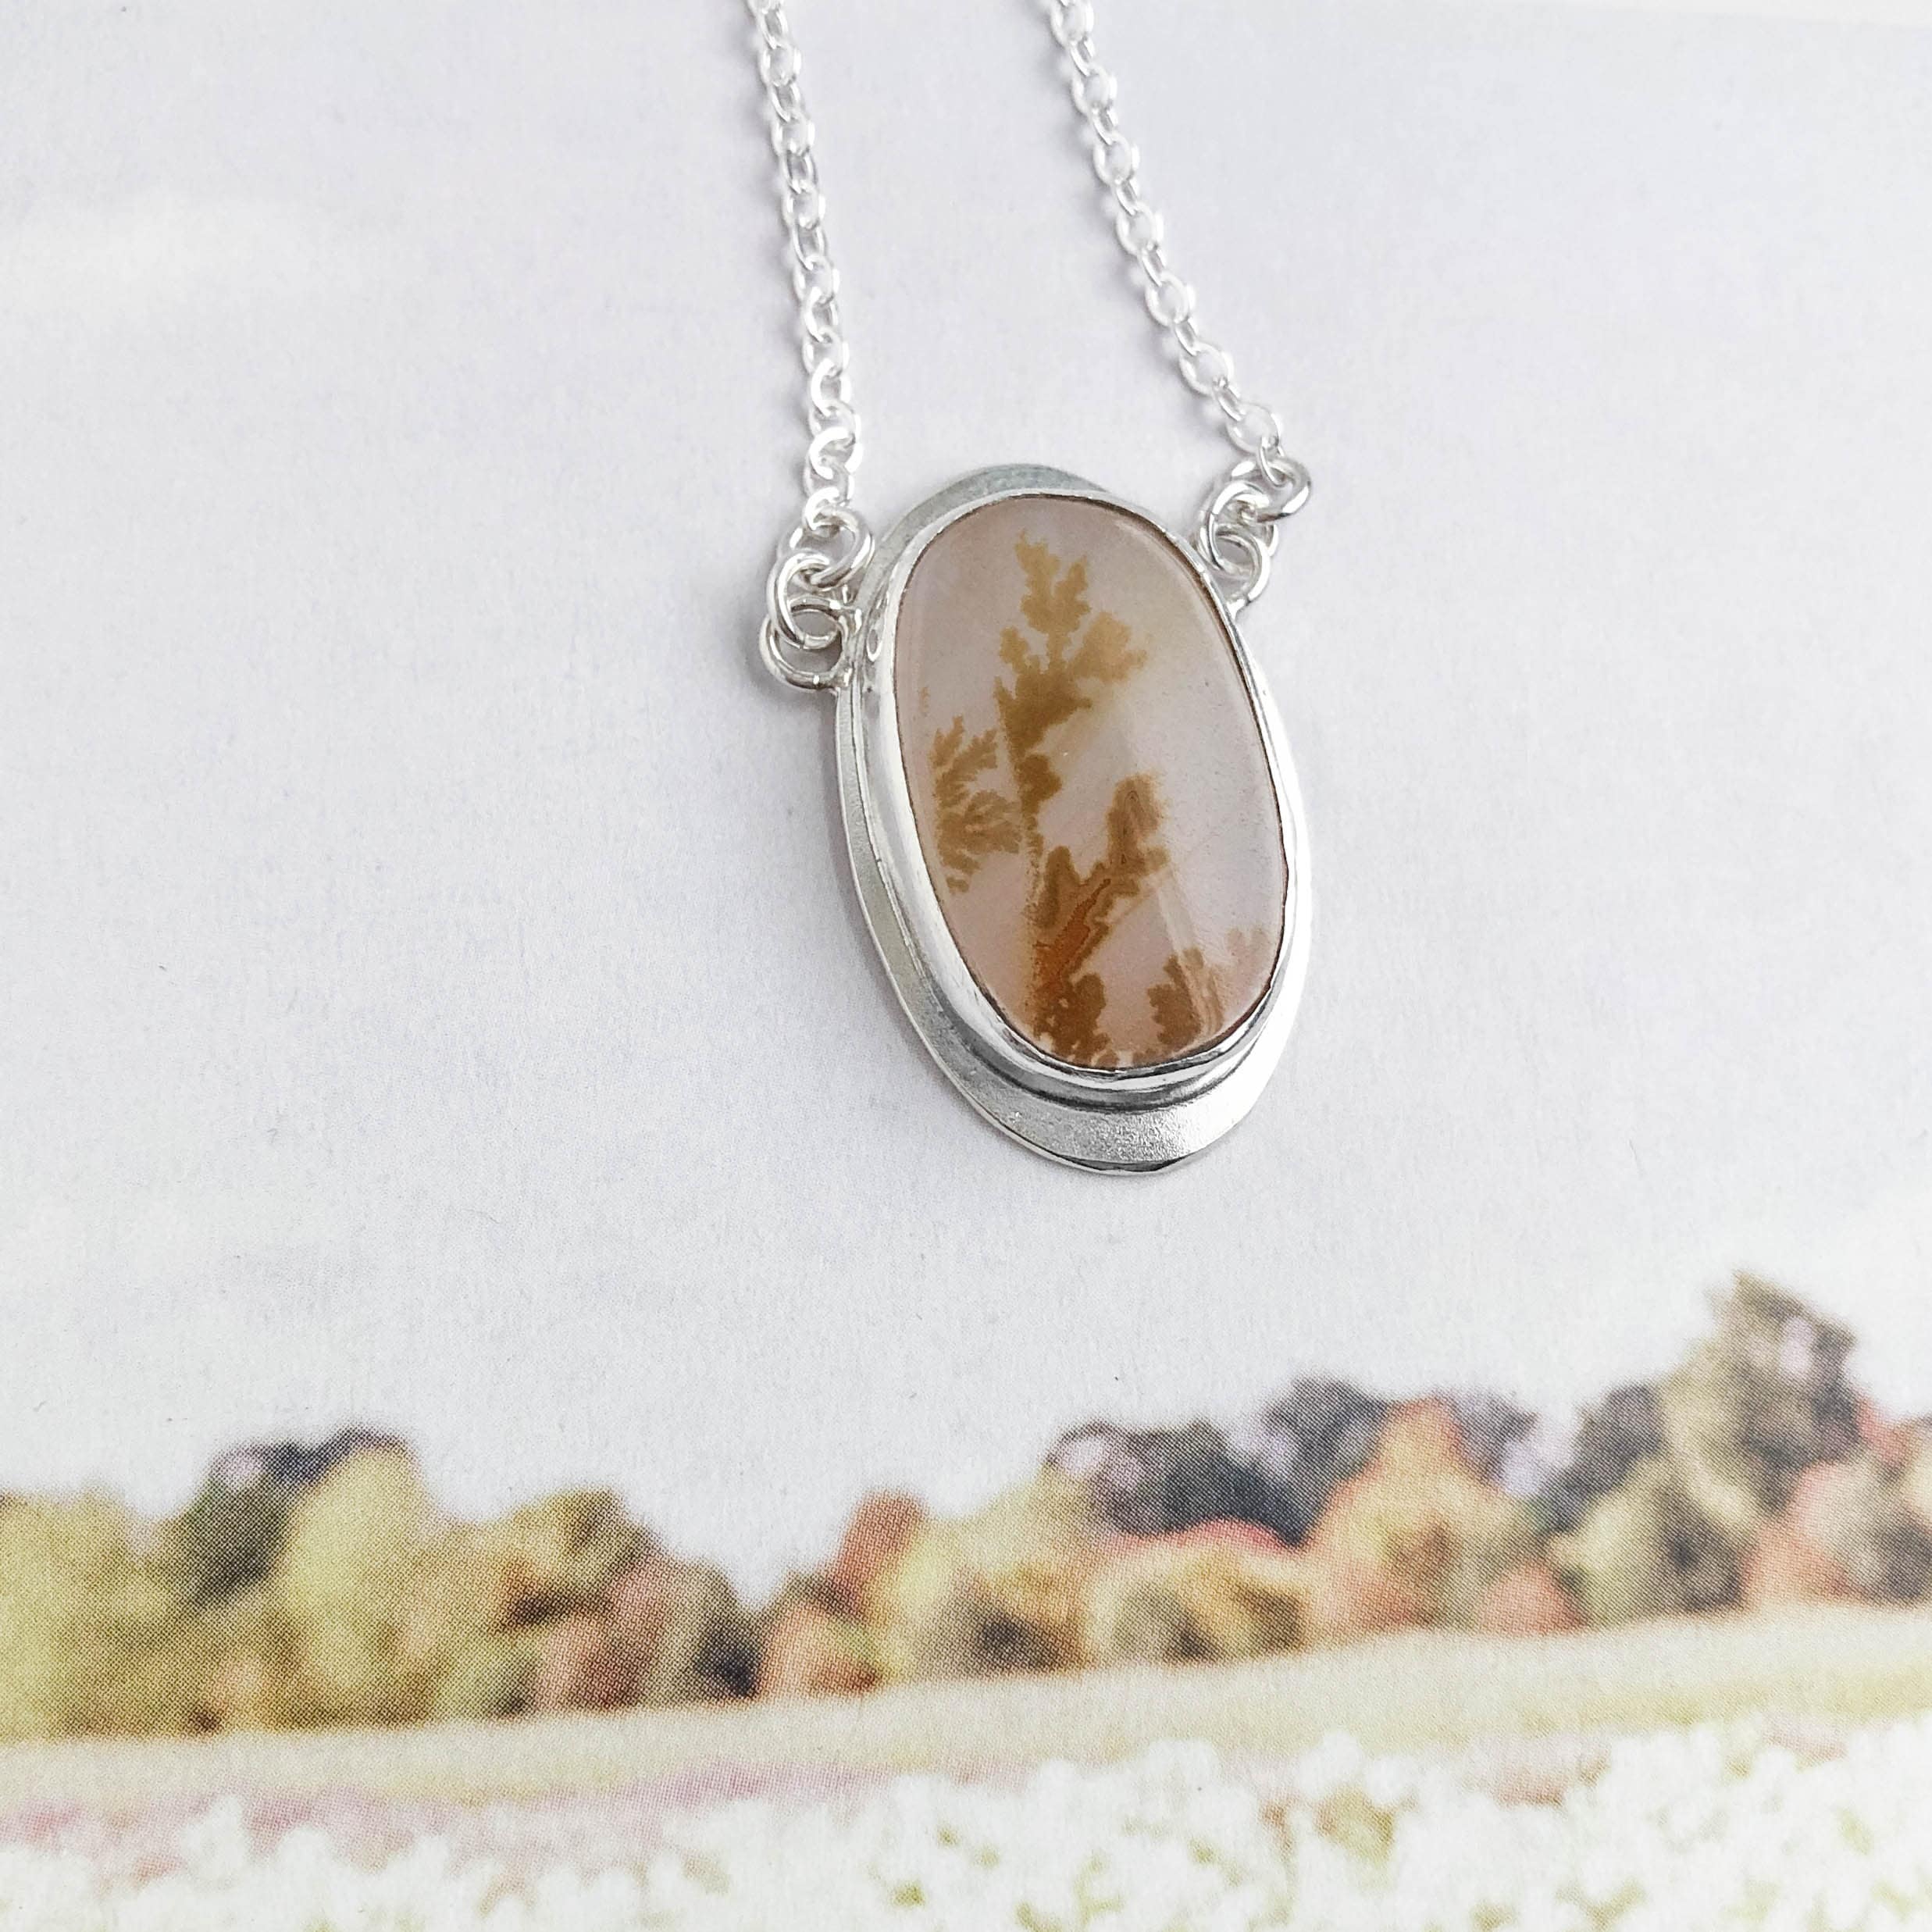 Oval Dendritic Agate Pendant Necklace